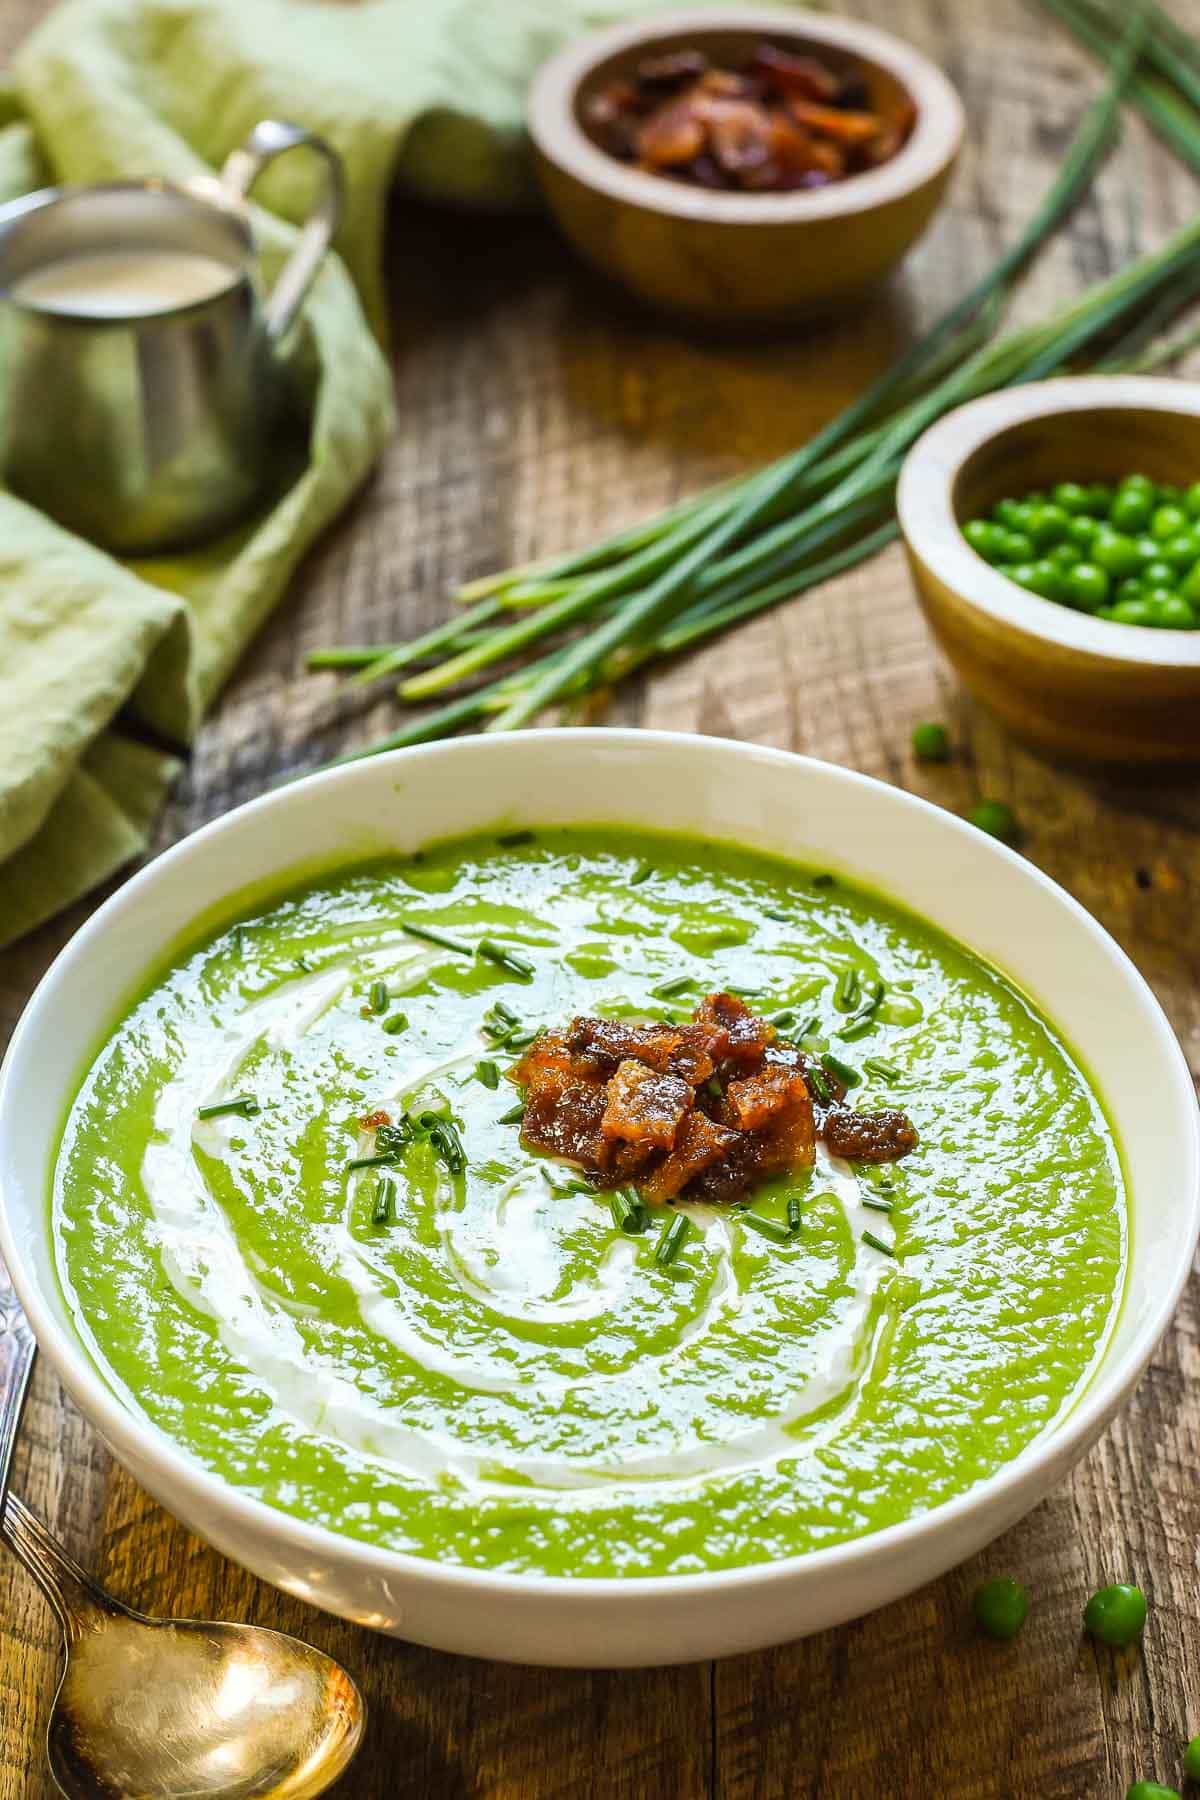 Green Pea Soup with smoky sweet candied bacon is a party for your tastebuds! Light, but creamy, sweet and salty, it's perfect for any spring meal!